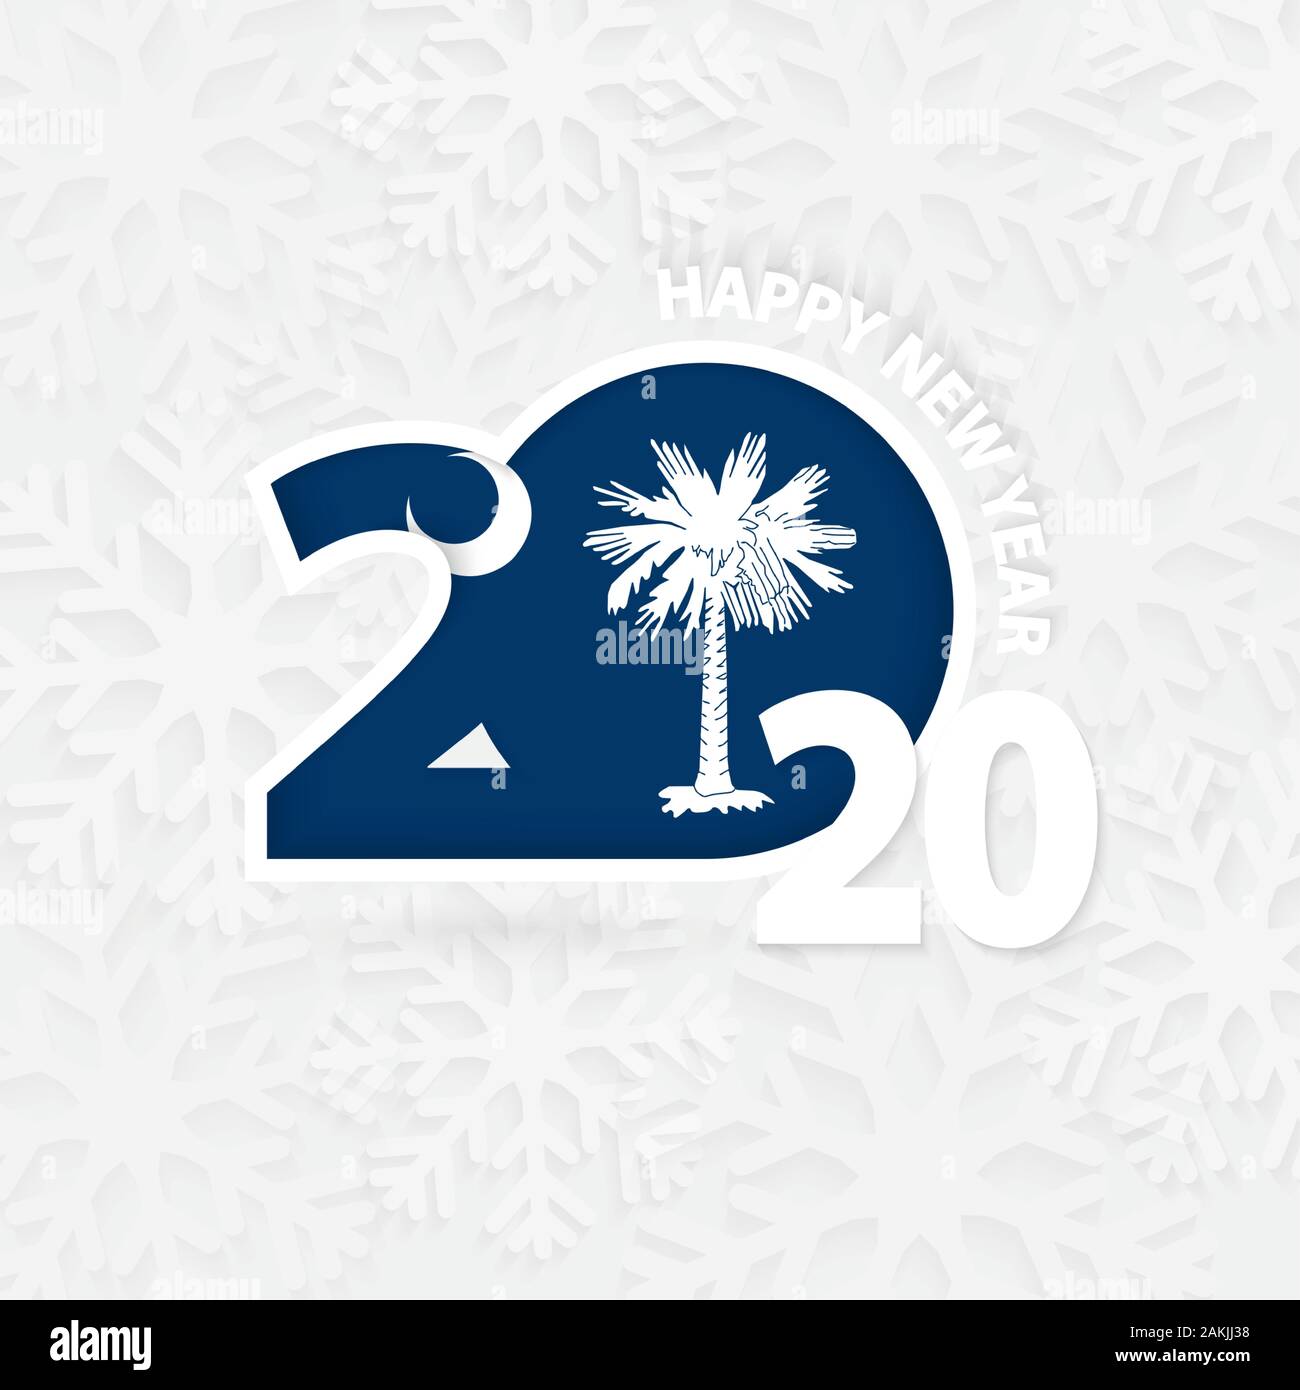 Happy New Year 2020 with flag of US state South Carolina on snowflake background. Greeting South Carolina with new 2020 year. Stock Vector